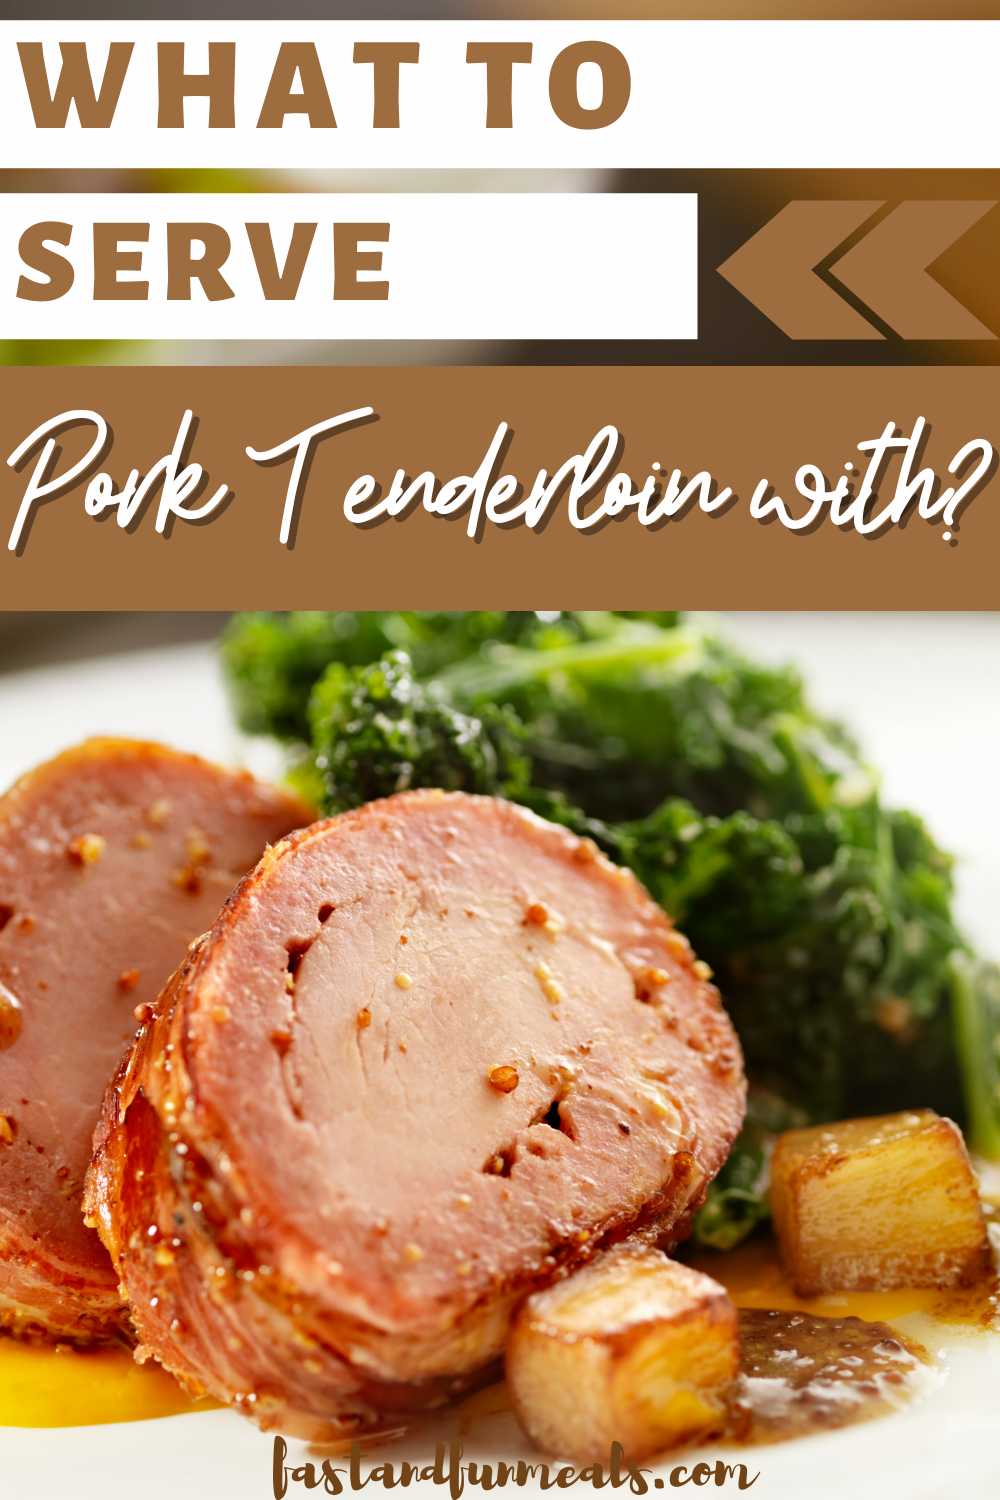 Pin showing the title What to Serve Pork Tenderloin With